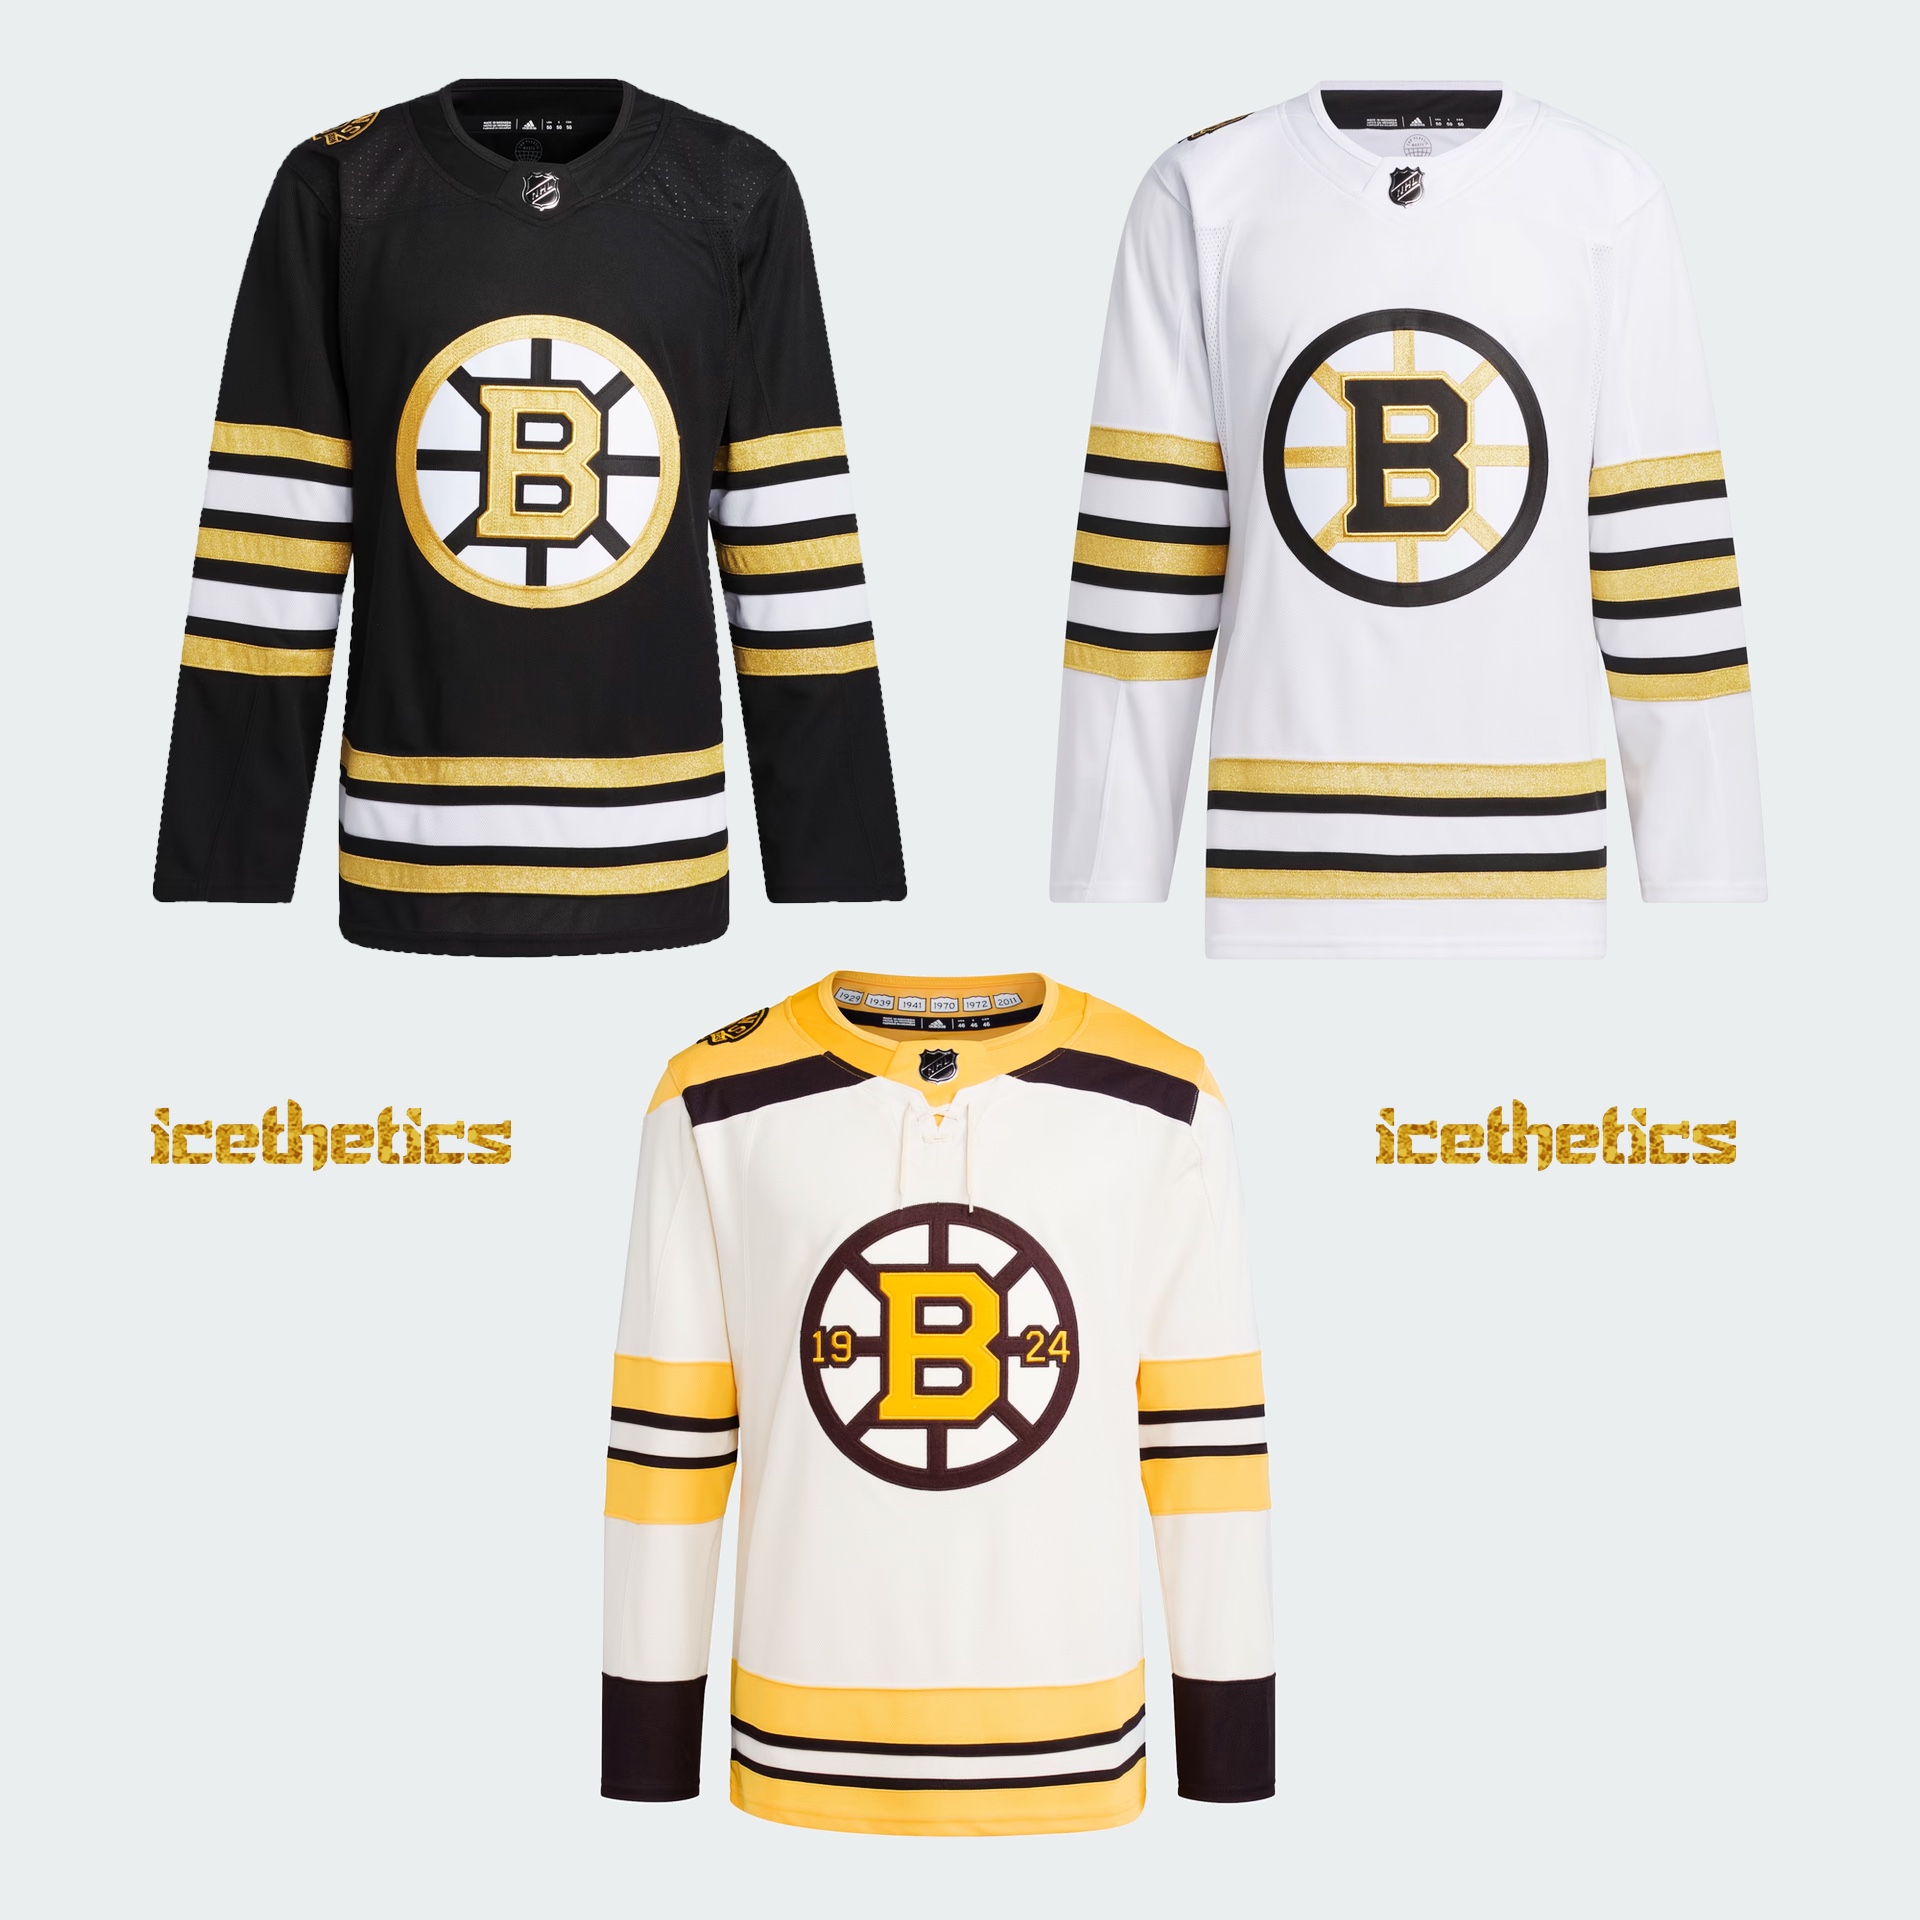 Providence Bruins reveal new jerseys, confirmed to be in NHL 14